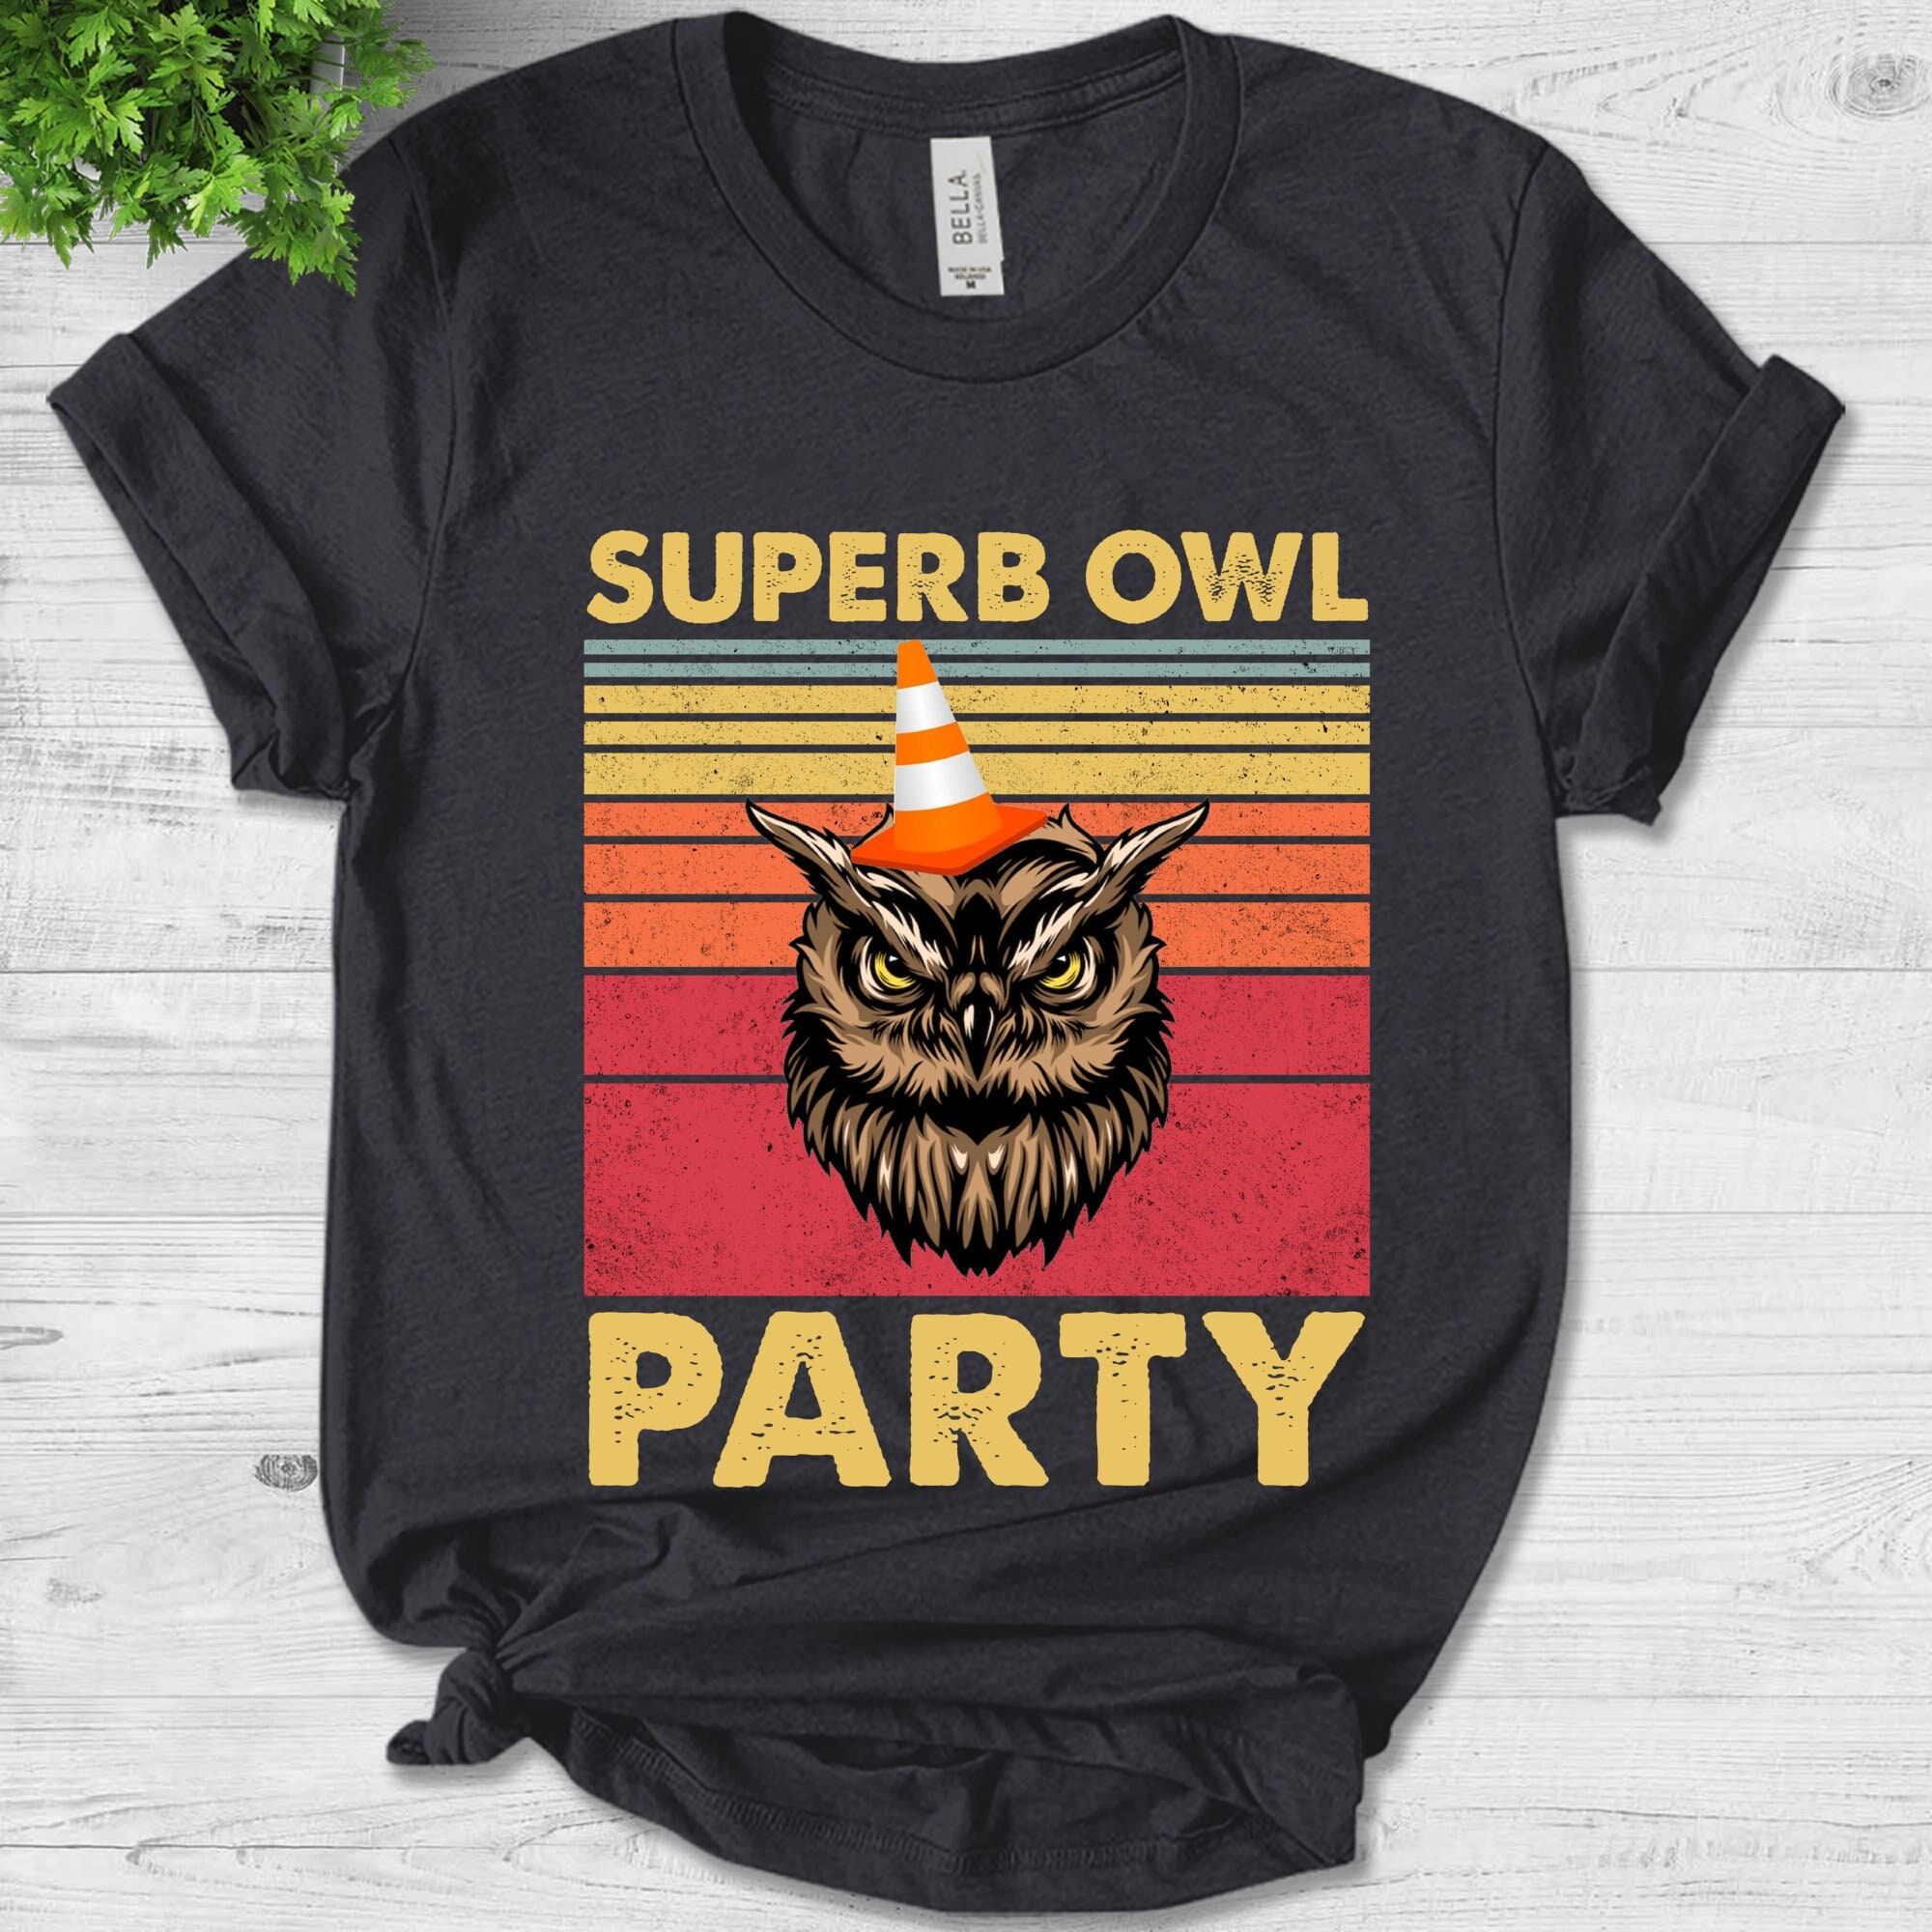 Discover Superb Owl Party What We Do In The Shadows Vintage T-Shirt, Retro Superb Owl Shirt